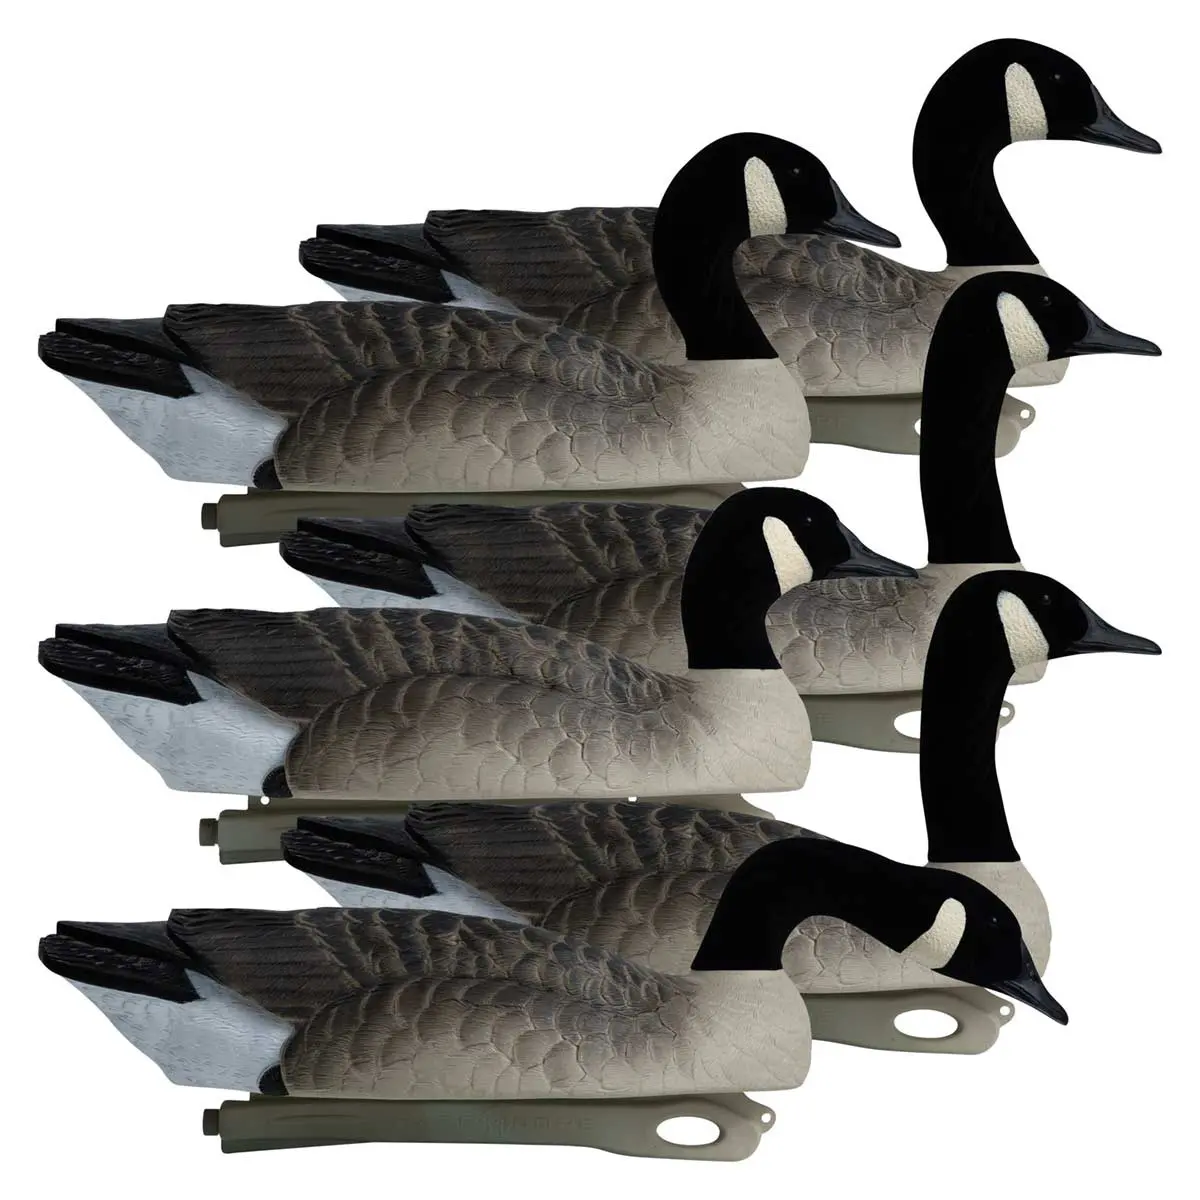 Rugged Series Canada Goose Floaters Touchdown Decoys - Flocked Head 6 Pack